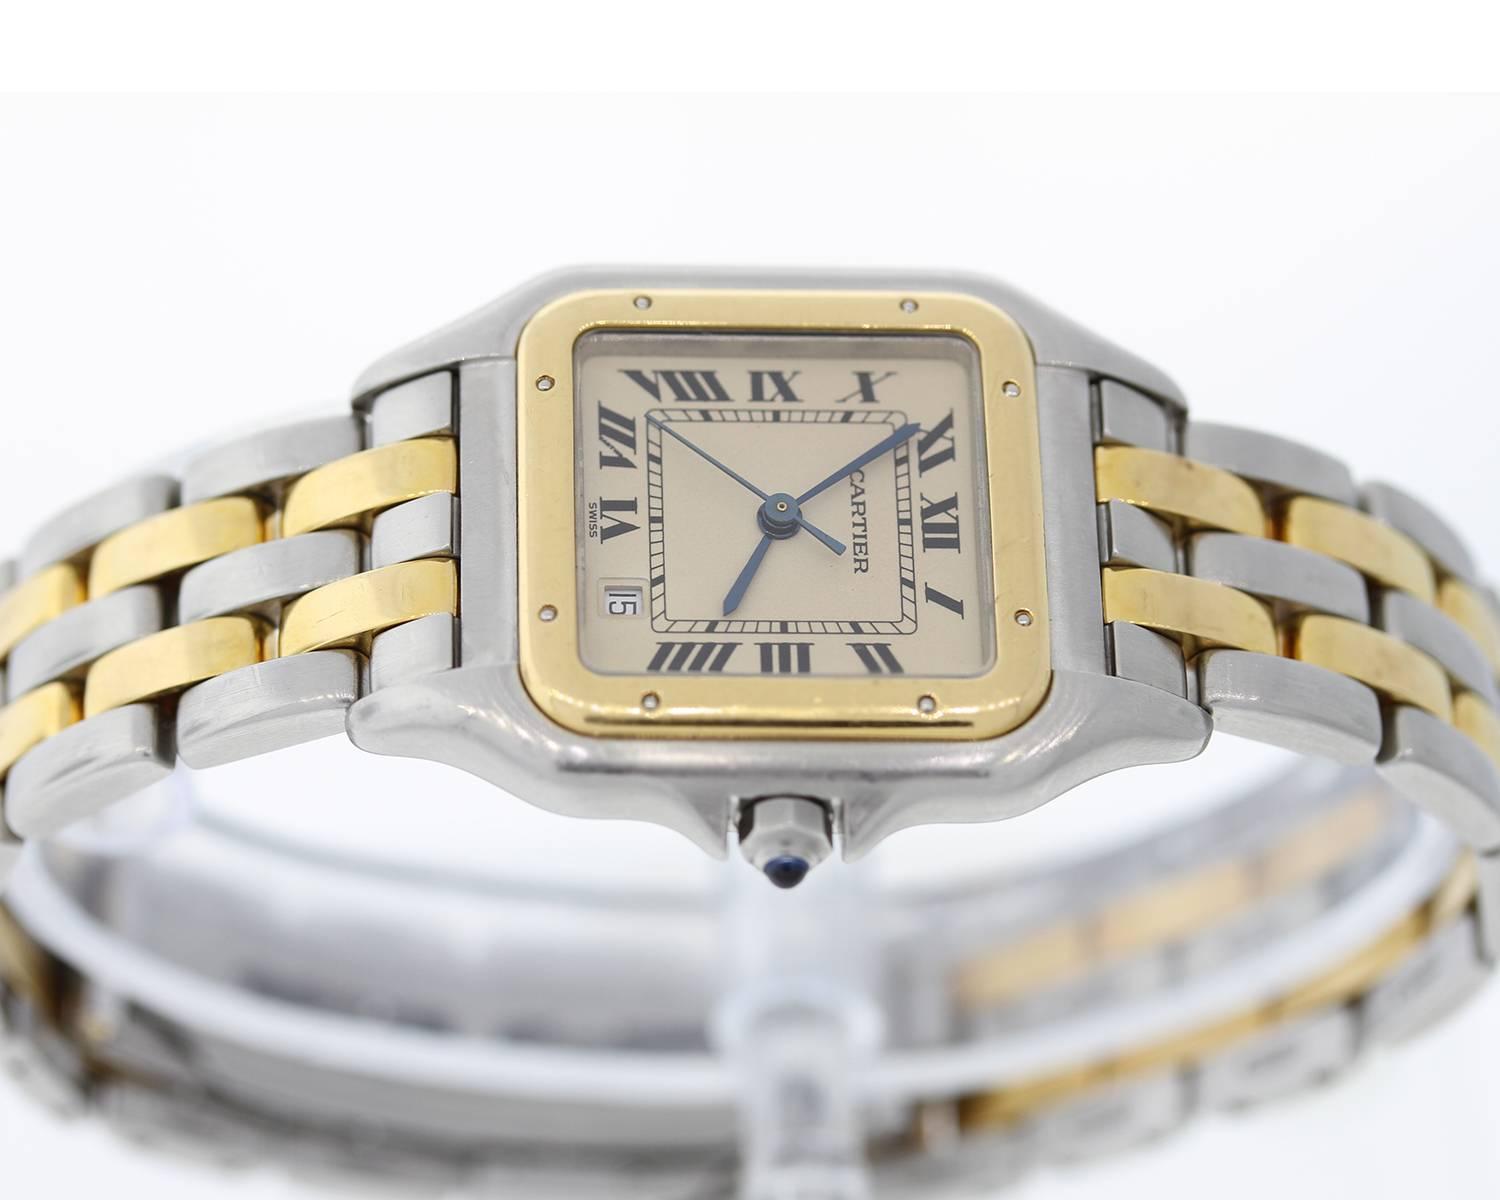 Brand Name: Cartier
Style Number: 31691
Style Name: Panthere 2 row
Color Name (Dial): Ivory Roman
Country of Manufacture: Switzerland
Gender: Womens
Strap Material: Stainless Steel/18K Yellow Gold
Case Metal: Stainless Steel/18K Yellow